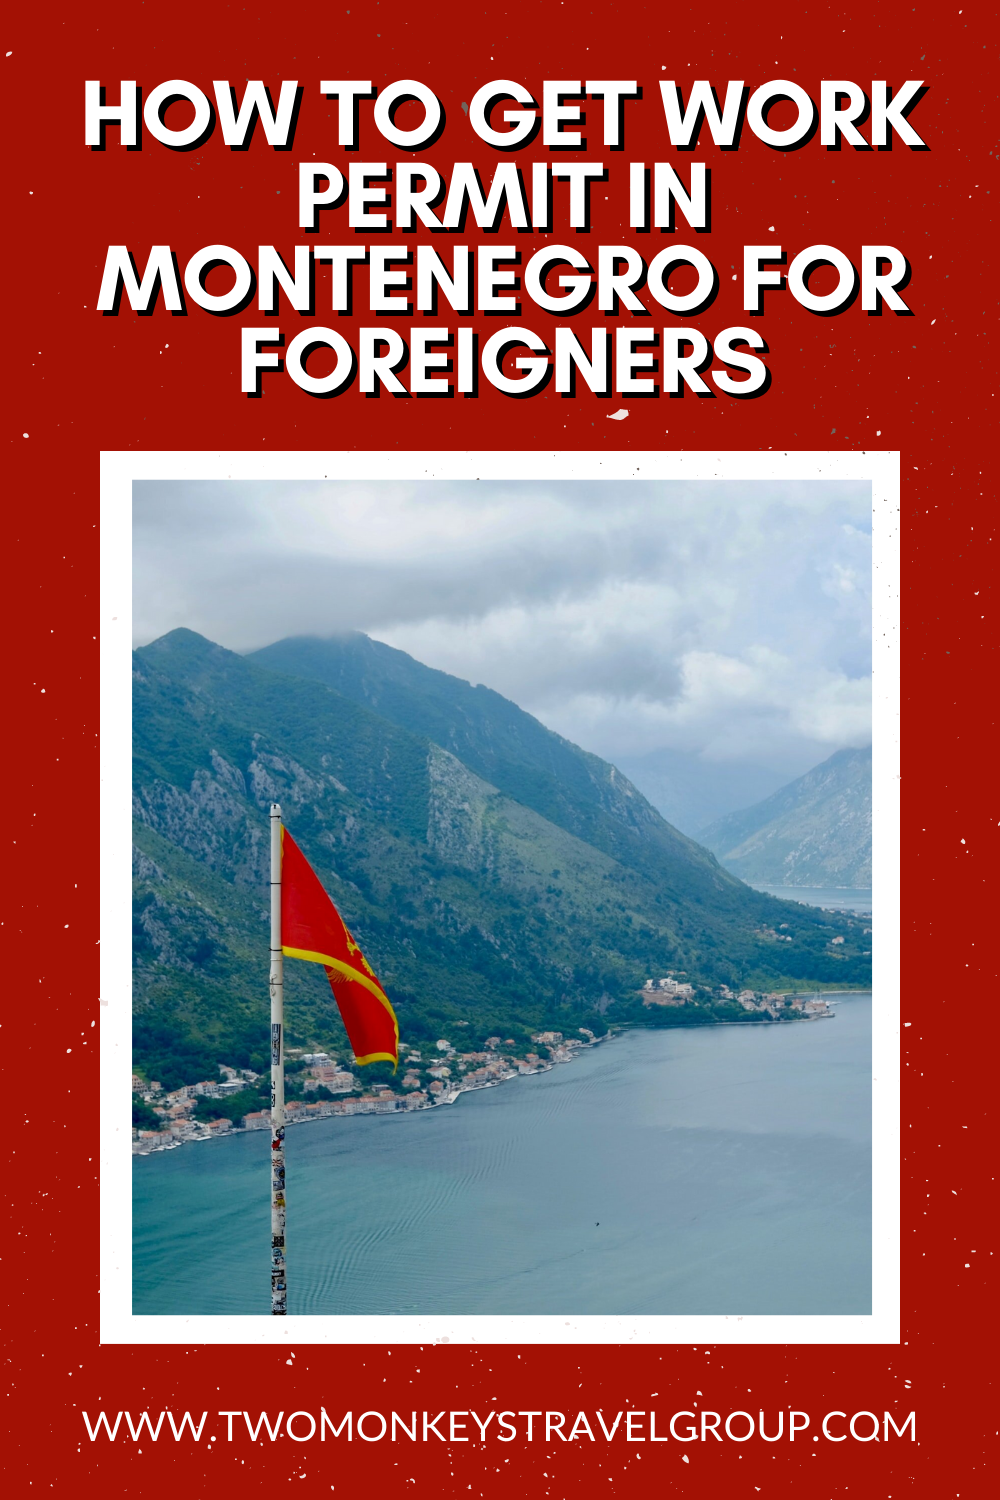 How to Get Work Permit in Montenegro for Foreigners1.png